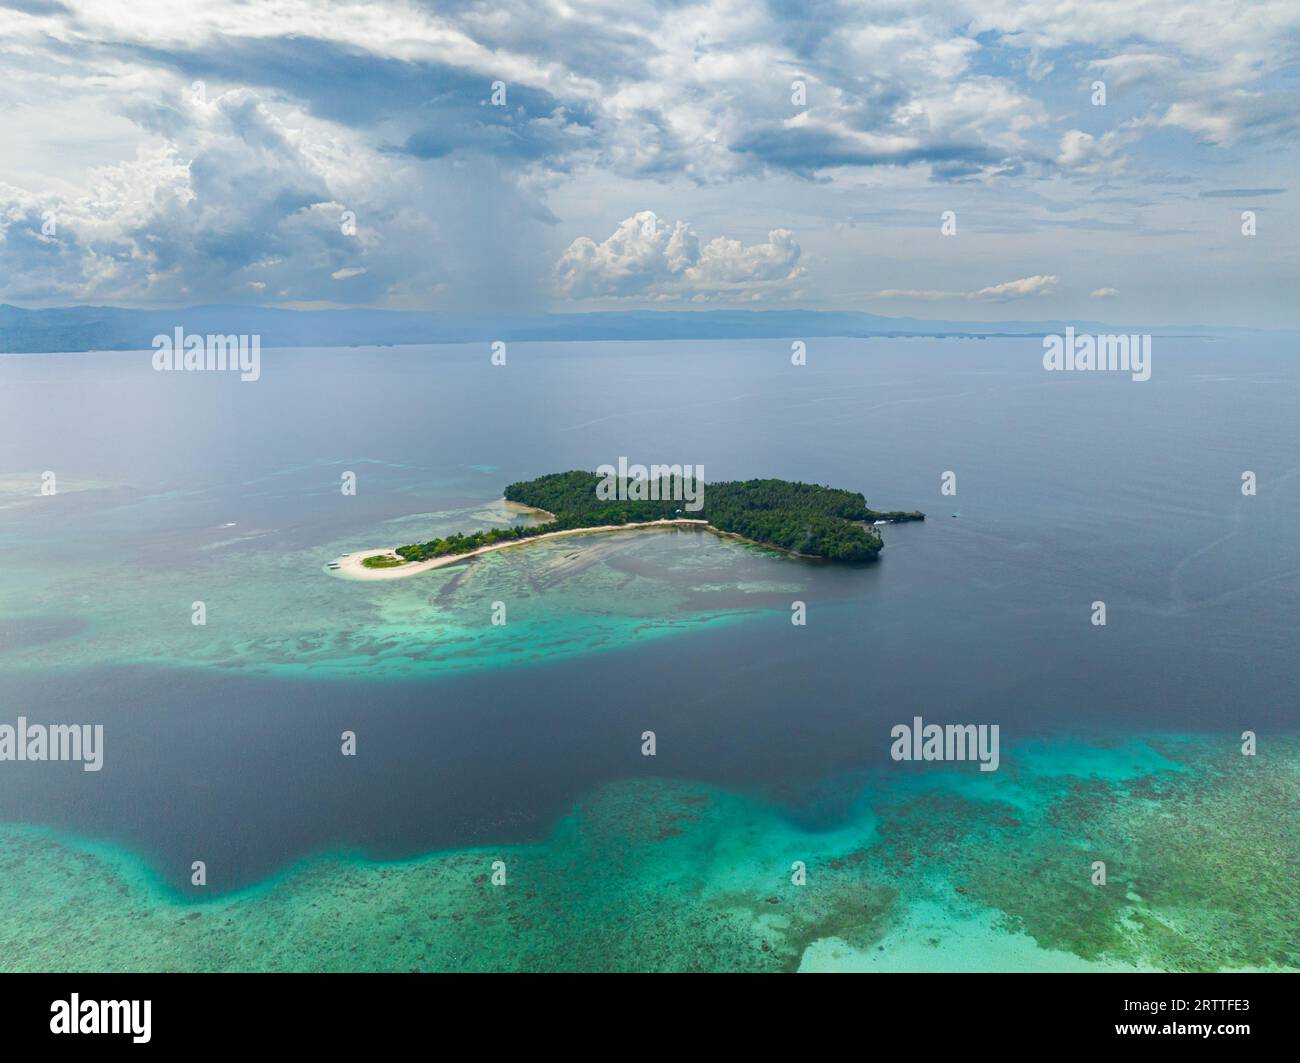 Cabgan Islet with white sandy beach, blue sky and clouds. Barobo, Surigao del Sur. Philippines. Stock Photo